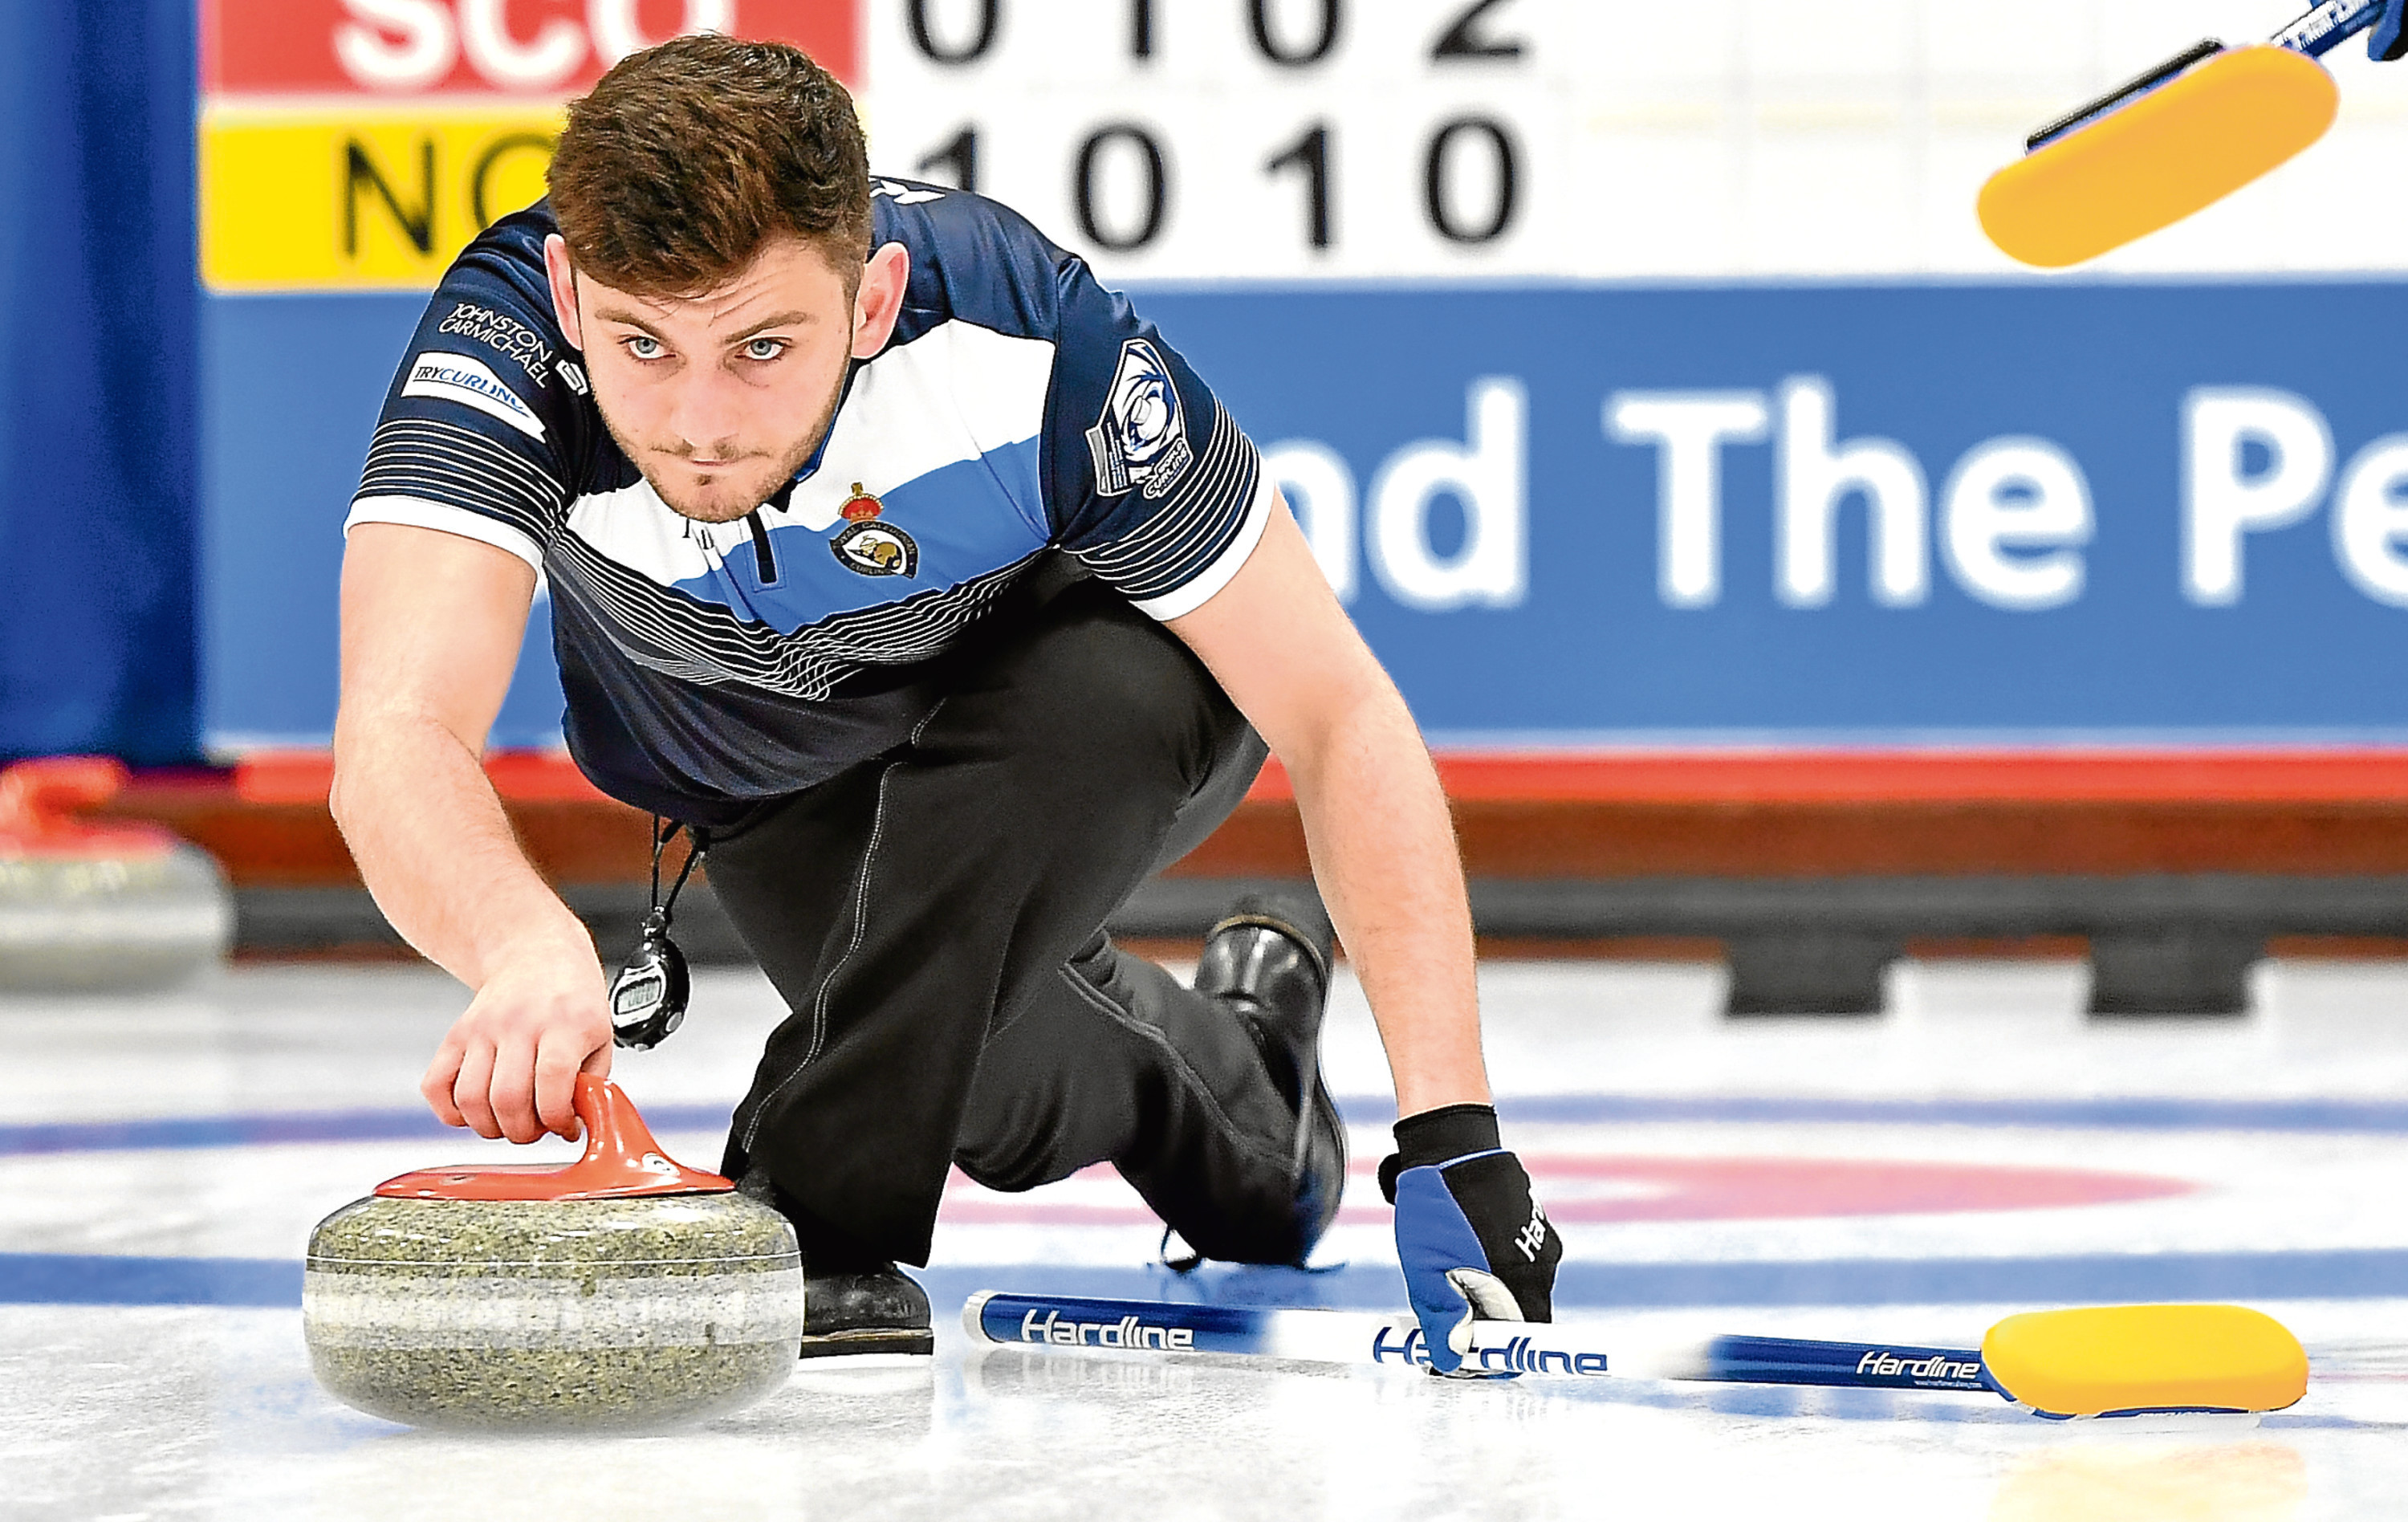 The World Junior Curling Championships 2018 at Curl Aberdeen.    
Men - Scotland v Norway    
Pictured - Scotland's Fraser Kingan.   
 
Picture by Kami Thomson    03-03-18